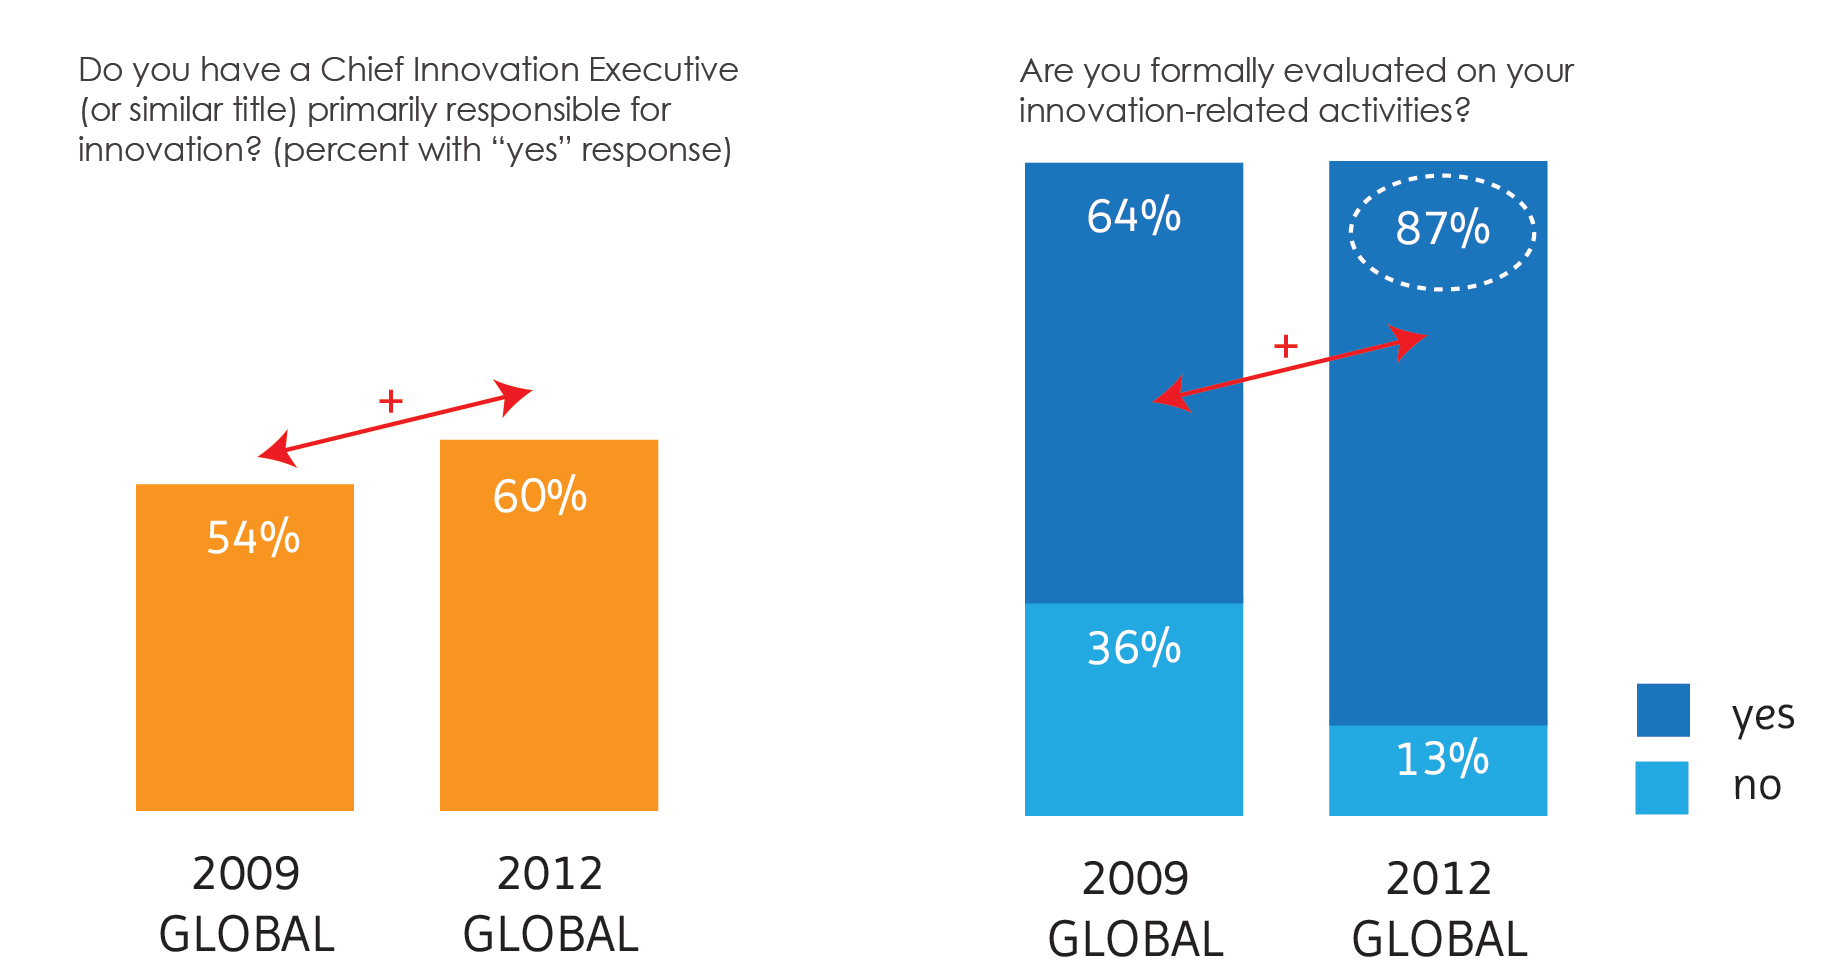 Source: Why “Low Risk” Innovation Is Costly” By Wouter Koetzier and Adi Alon Copyright © 2013 Accenture